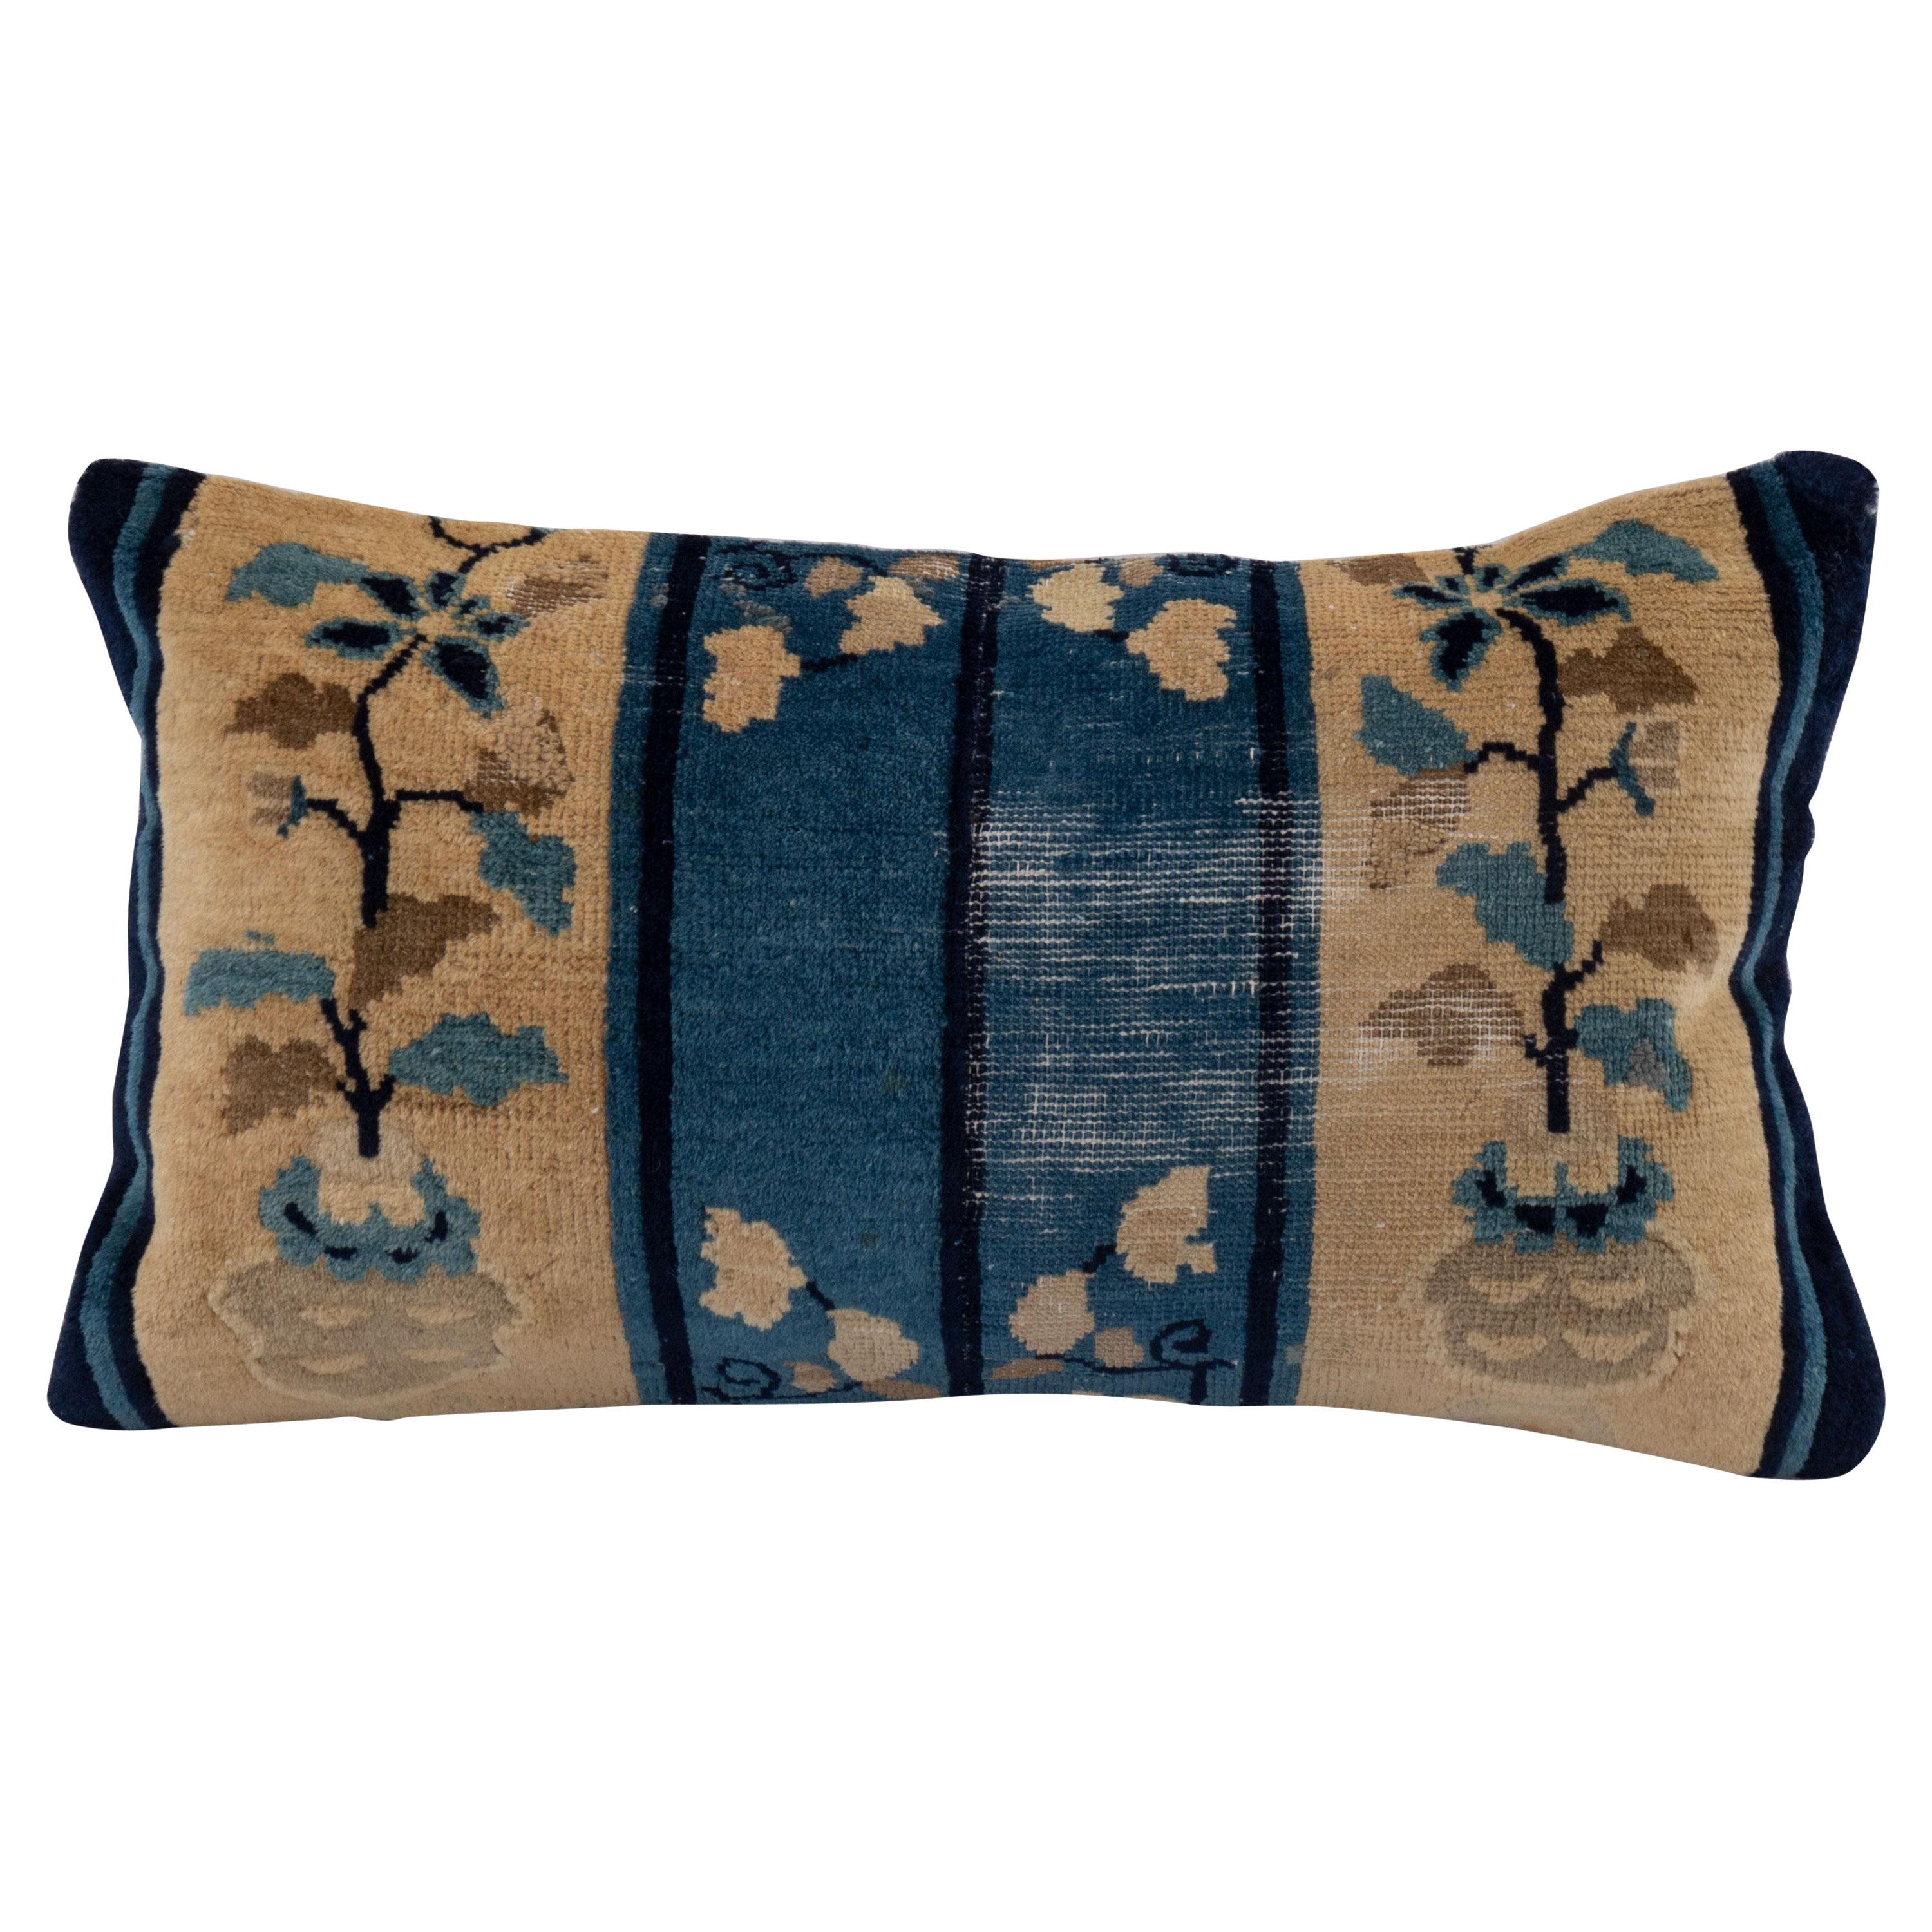 Pillow Cover Made from a Chinese Art Deco Rug, early 20th C.